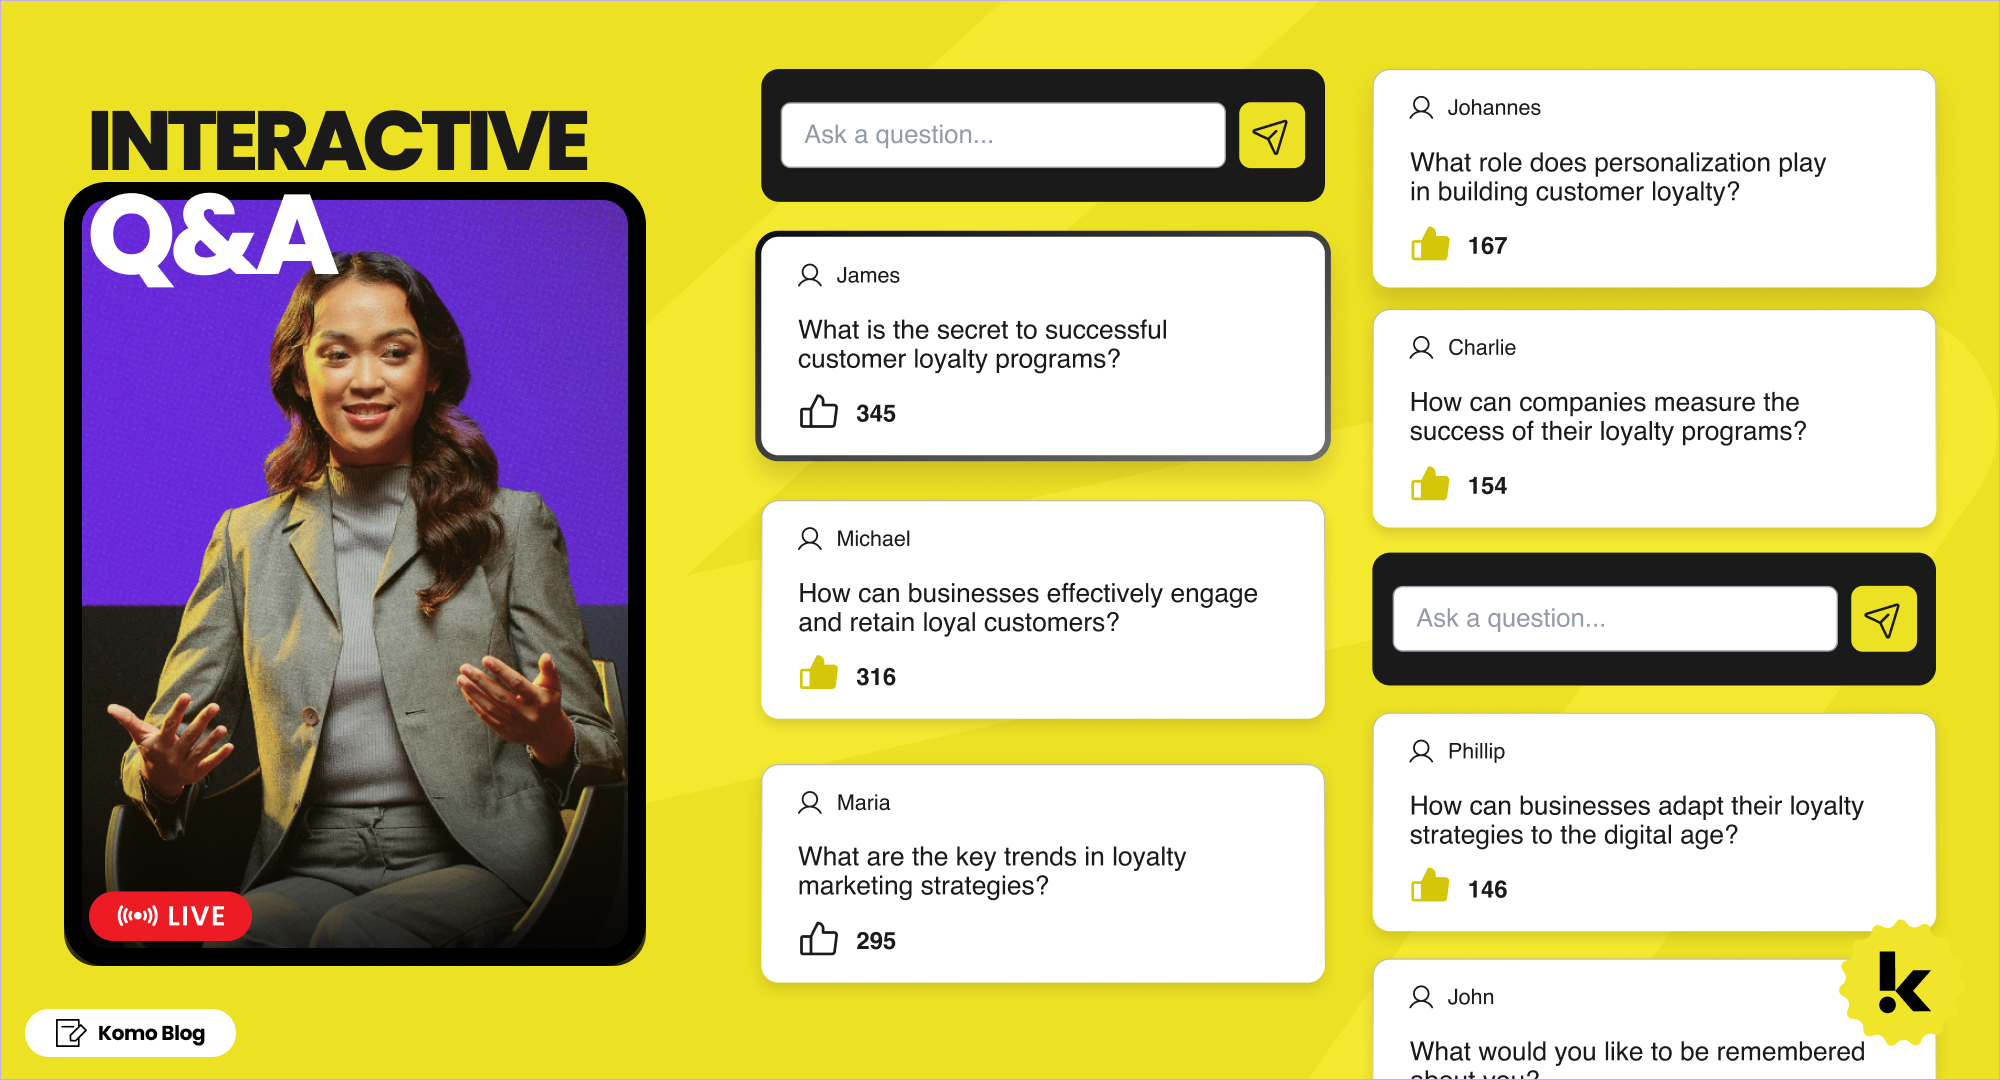 The Interactive Q&A Card acts as a tool to run and moderate a forum-style live event, whether in-person or virtually. 